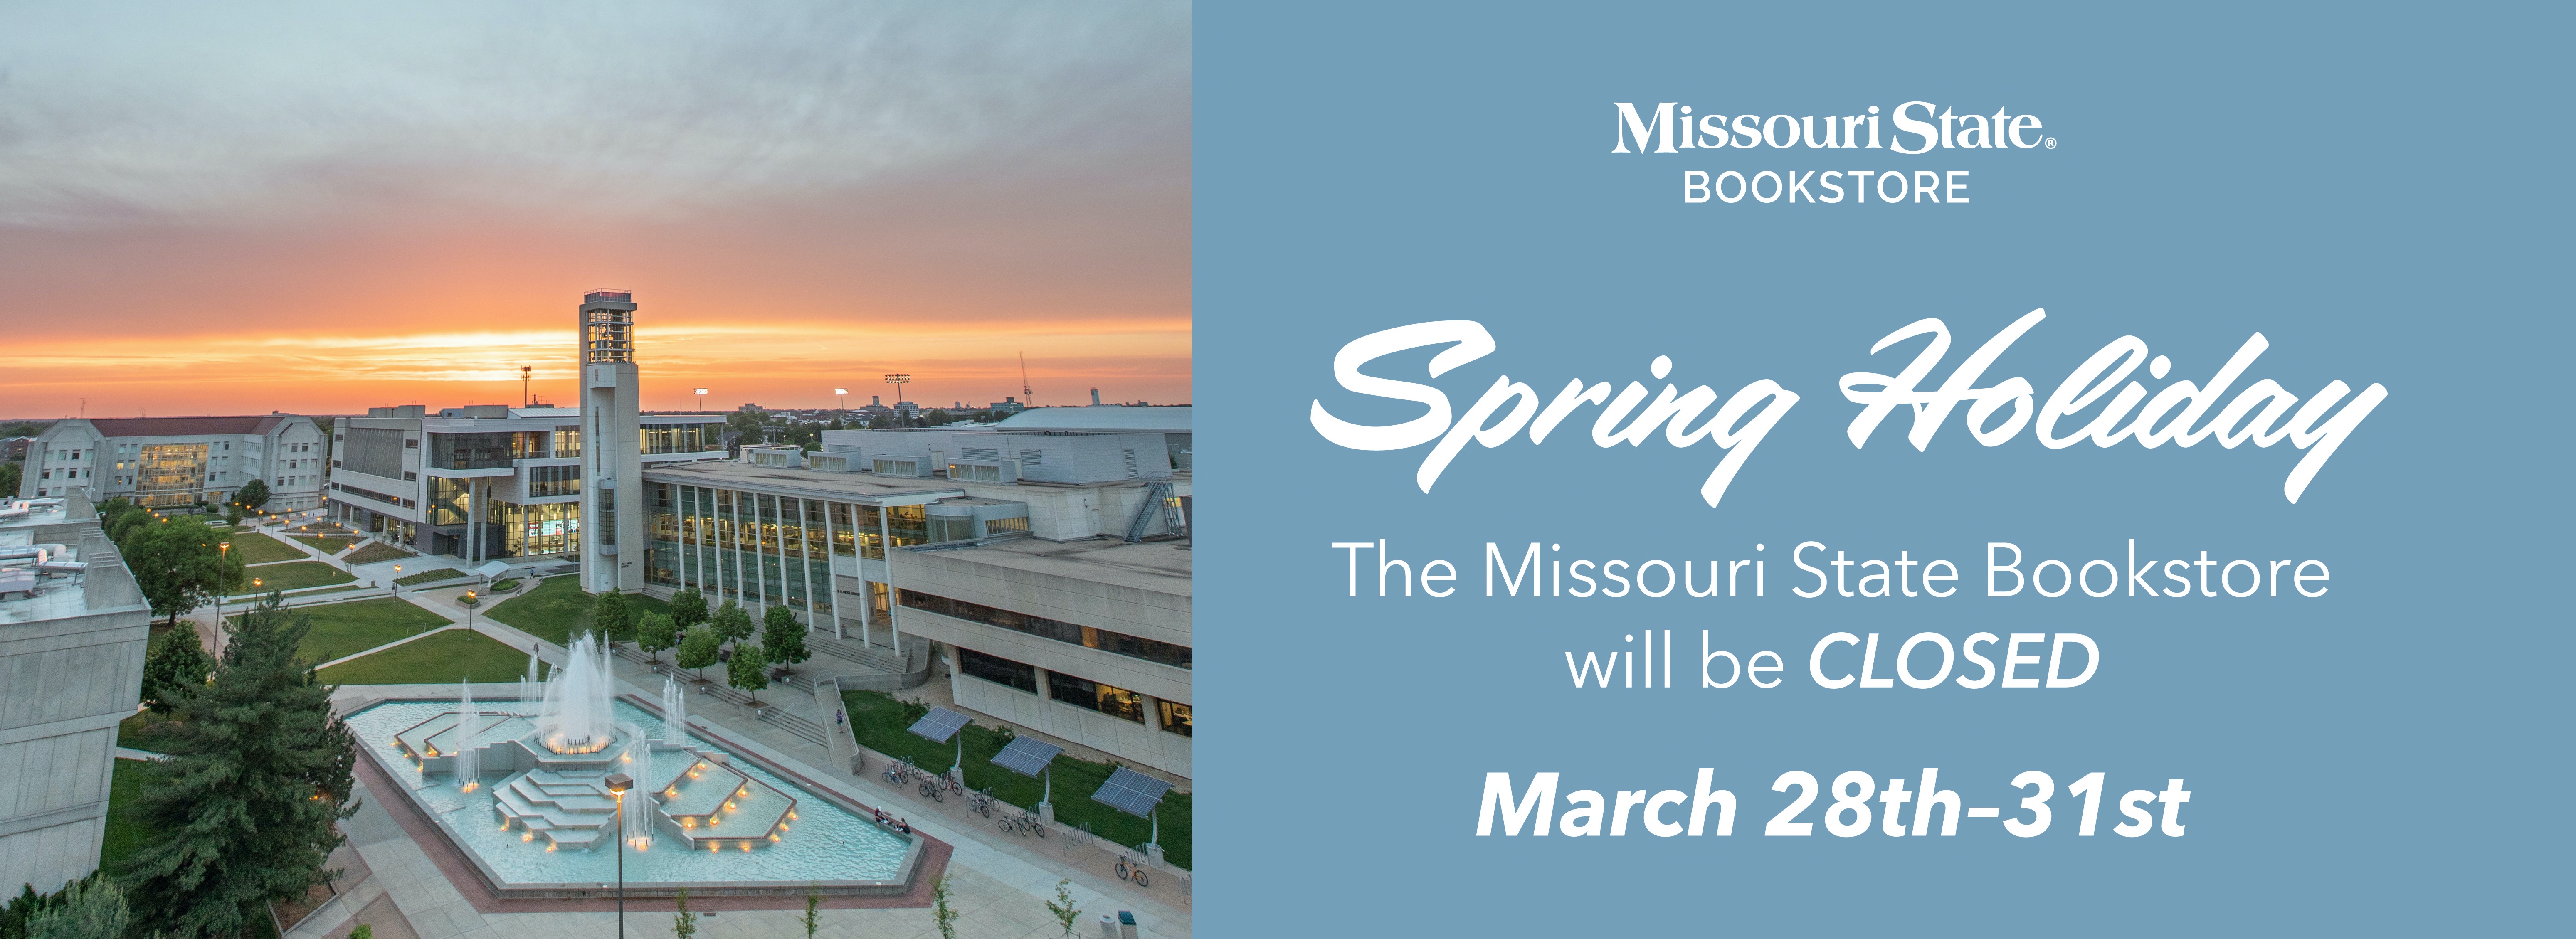 Missouri State Bookstore, Spring Holiday, The Missouri State Bookstore will be CLOSED March 28th - 31st.